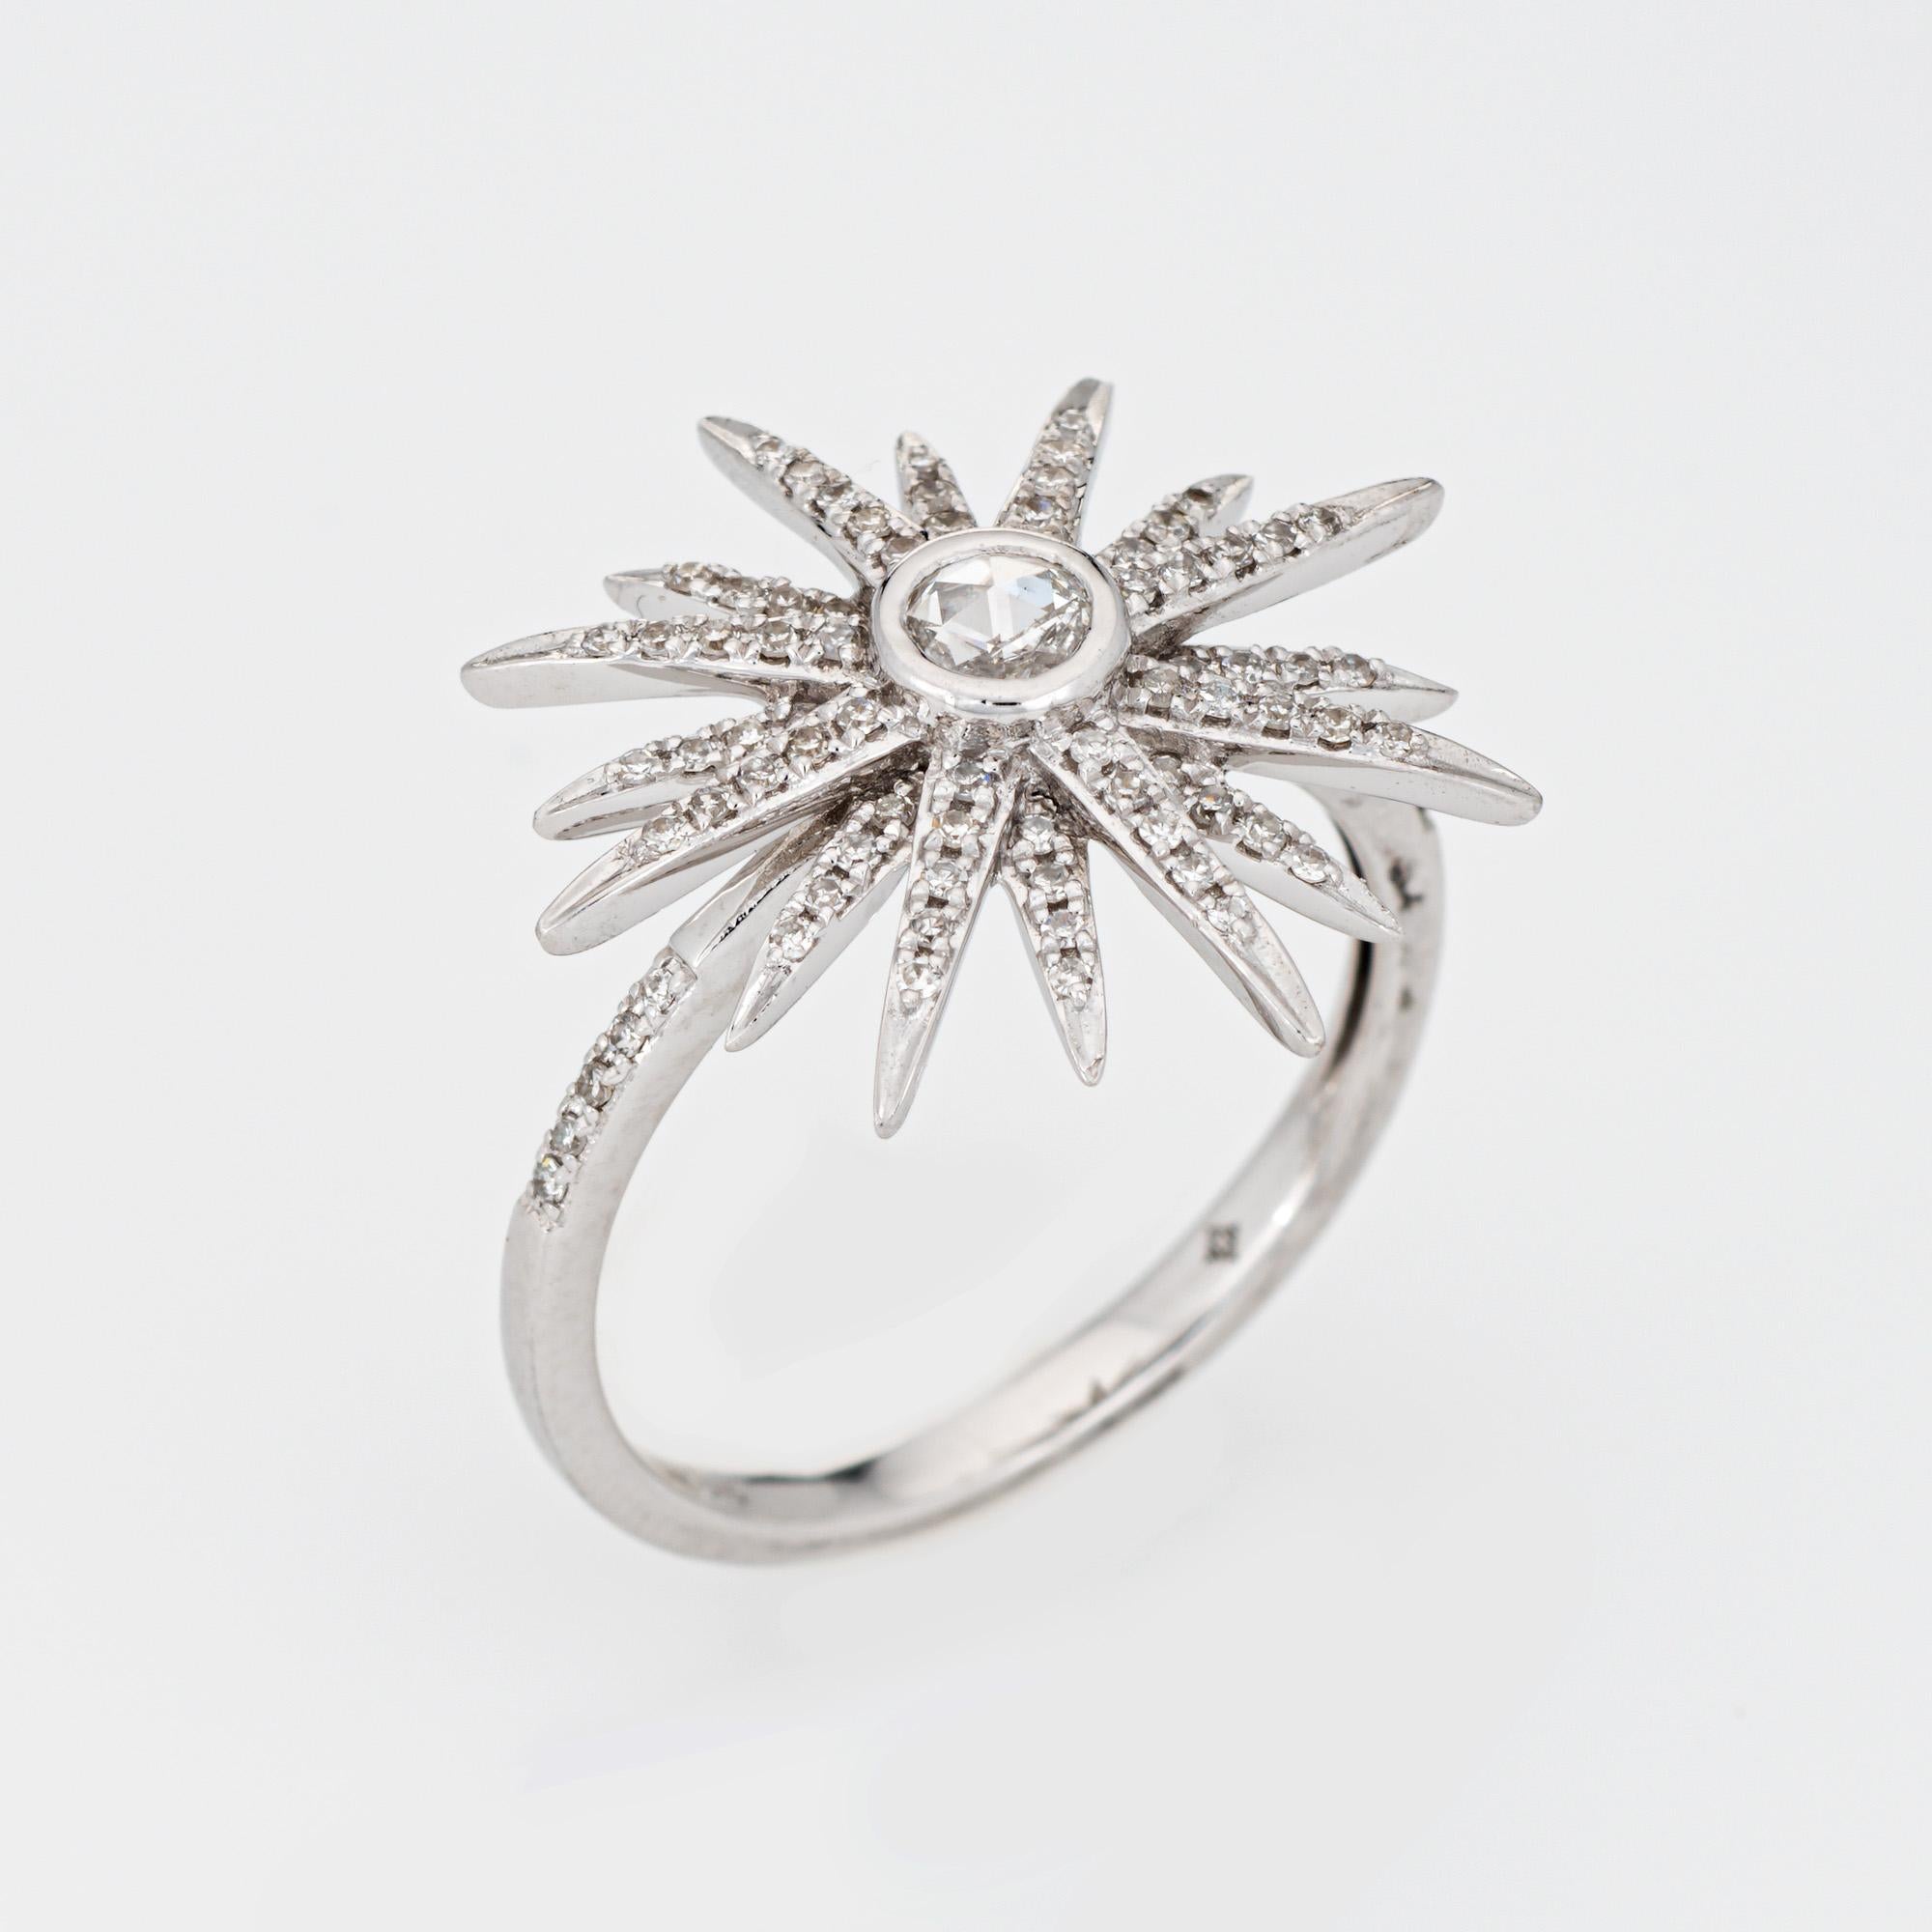 Stylish diamond starburst ring crafted in 14 karat white gold. 

Rose & single cut diamonds total an estimated 0.25 carats (estimated at L-M color and SI2-I2 clarity). 

Set with diamonds in each of the star points, the ring makes a nice statement